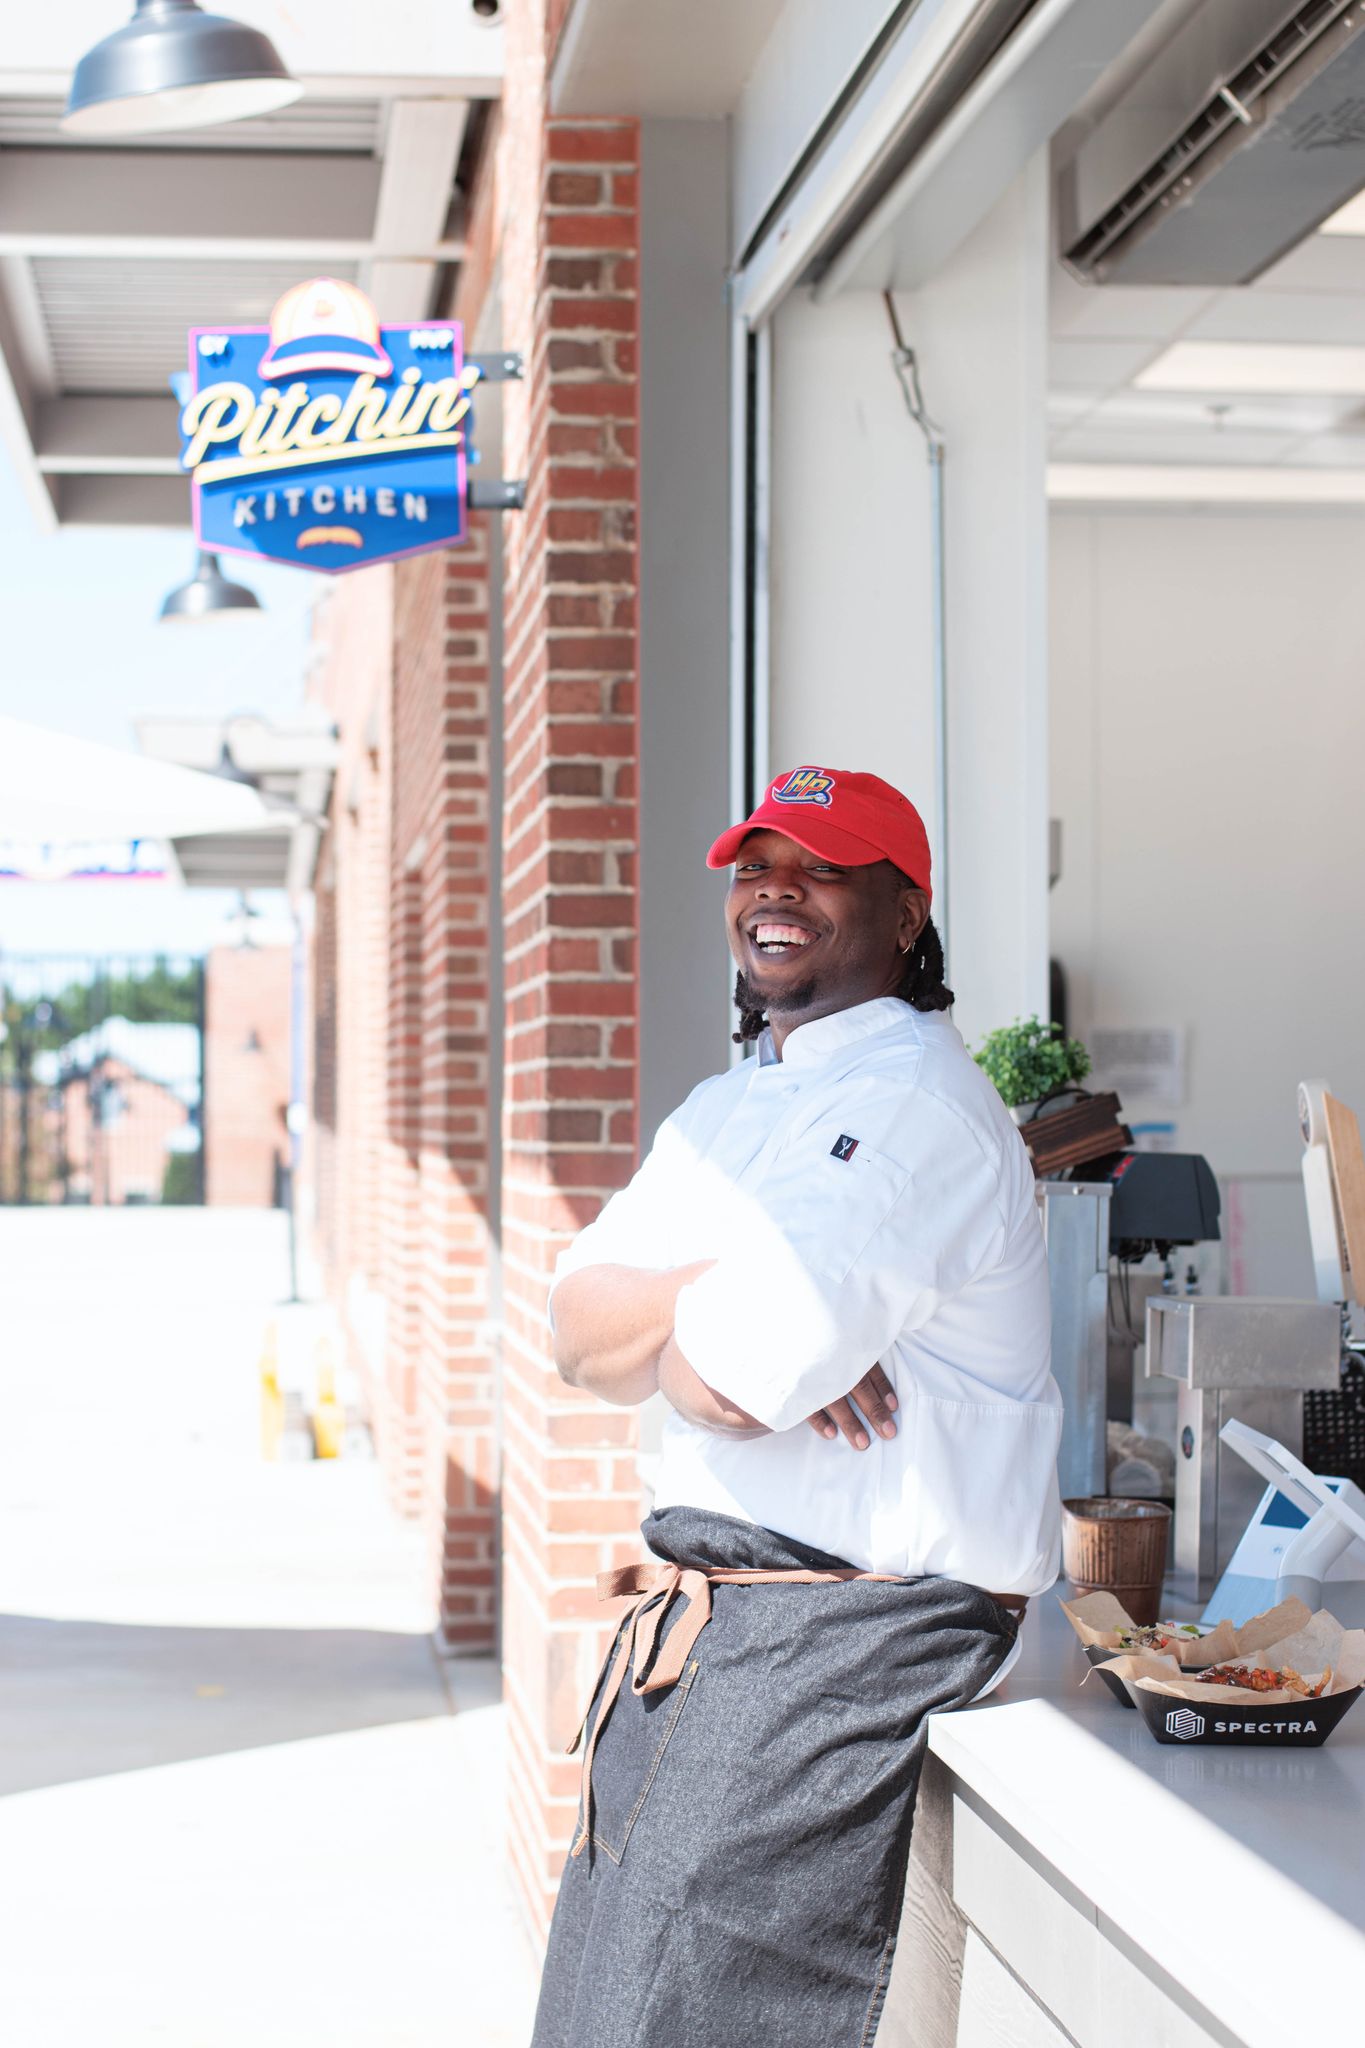 Man in white chef's jacket and red baseball hat leans against outdoor kitchen counter with a "Pitchin' Kitchen" sign hanging above him.